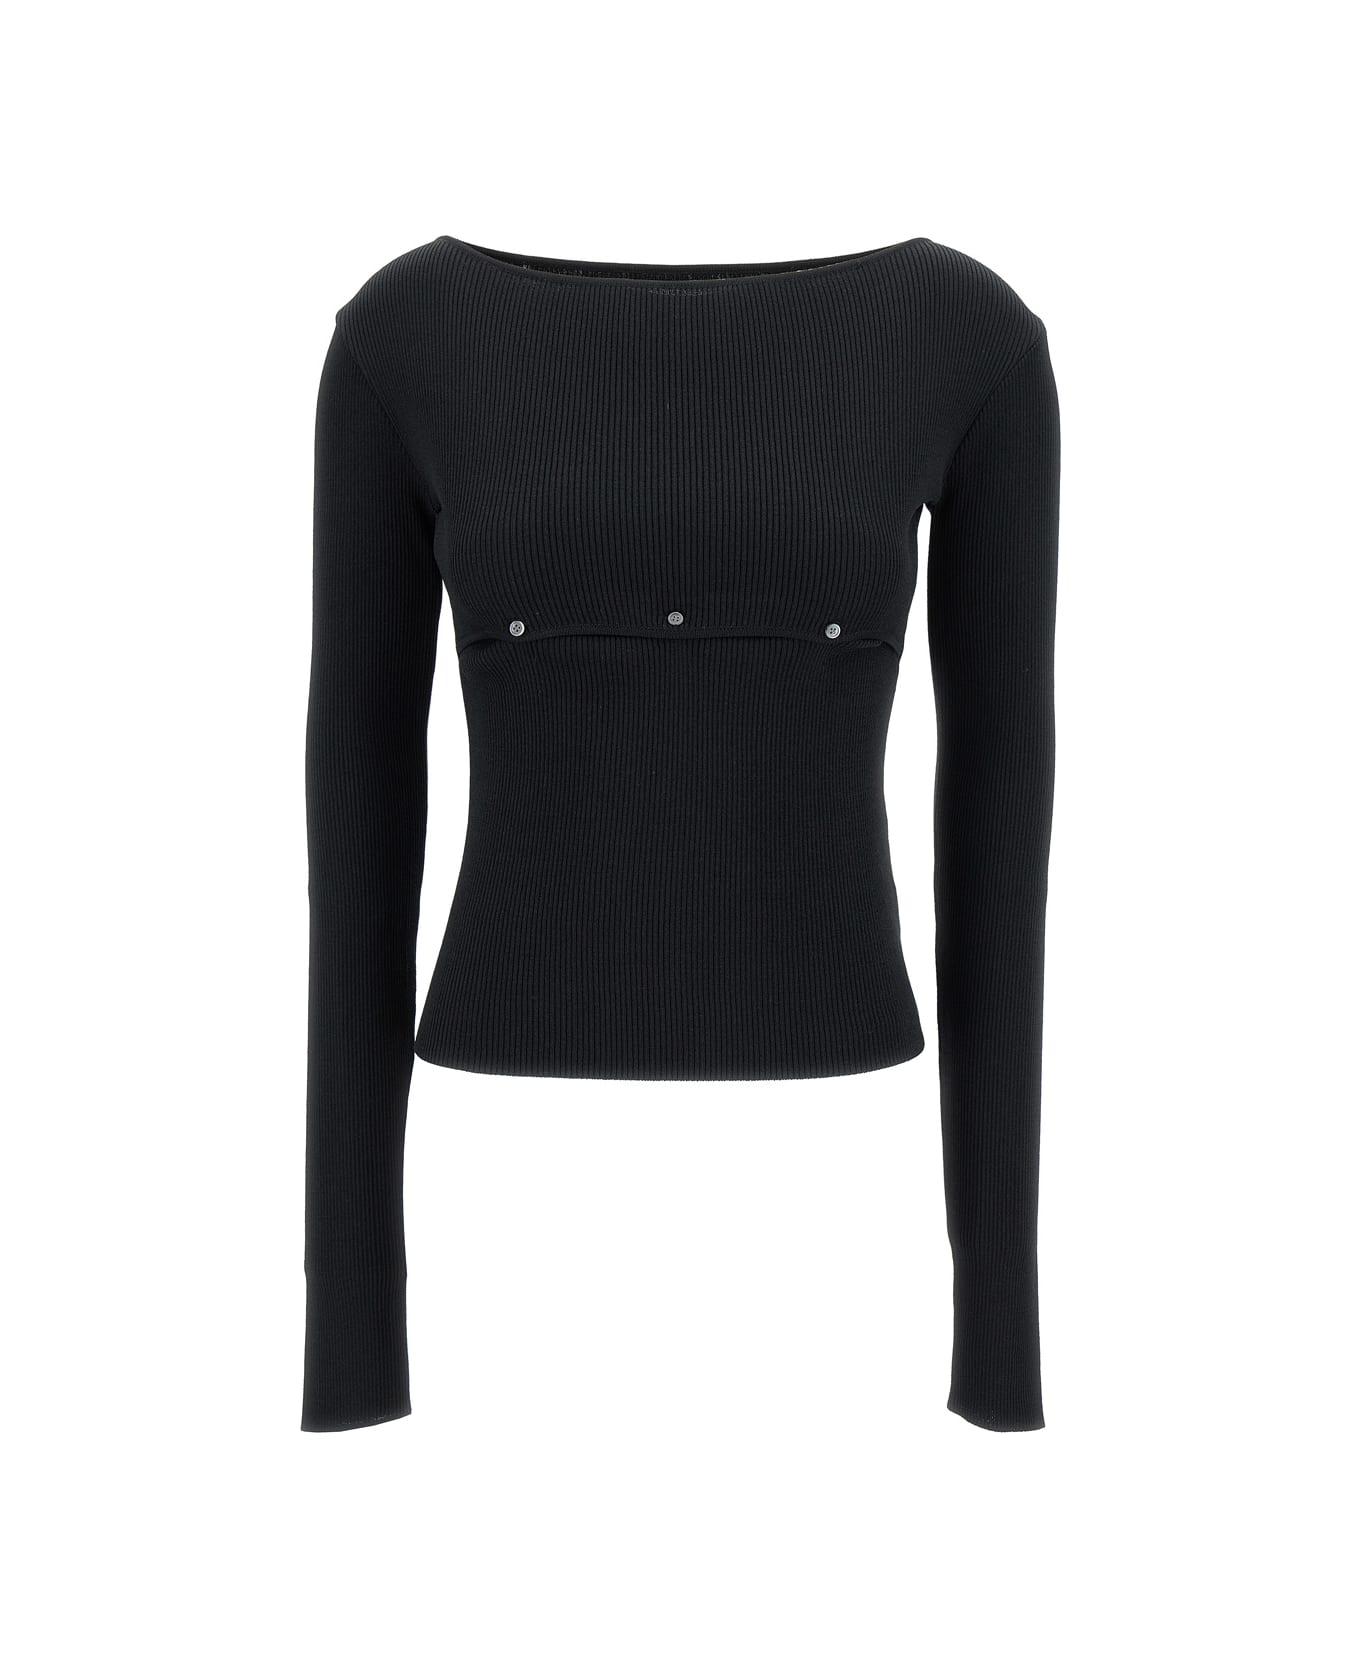 Low Classic Black Ribbed Top With Boat Neckline And Buttons In Rayon Blend Woman - Black